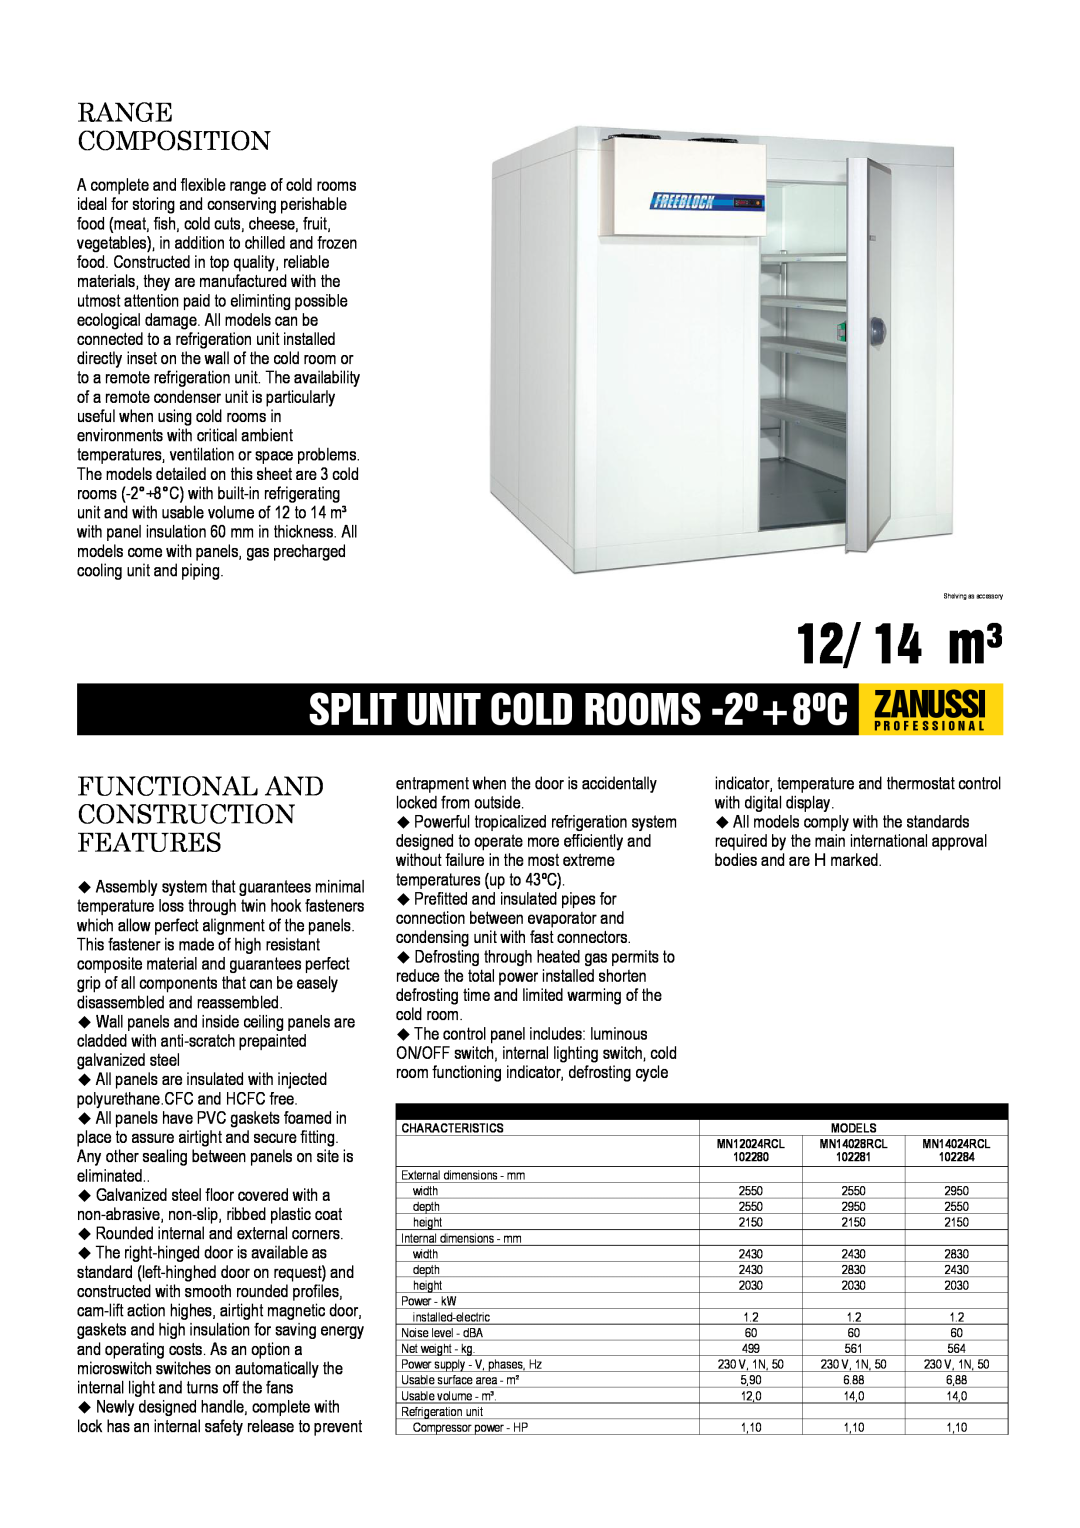 Zanussi MN14024RCL, MN14028RCL, MN12024RCL dimensions 12/ 14 m³, Range Composition, Functional And Construction Features 